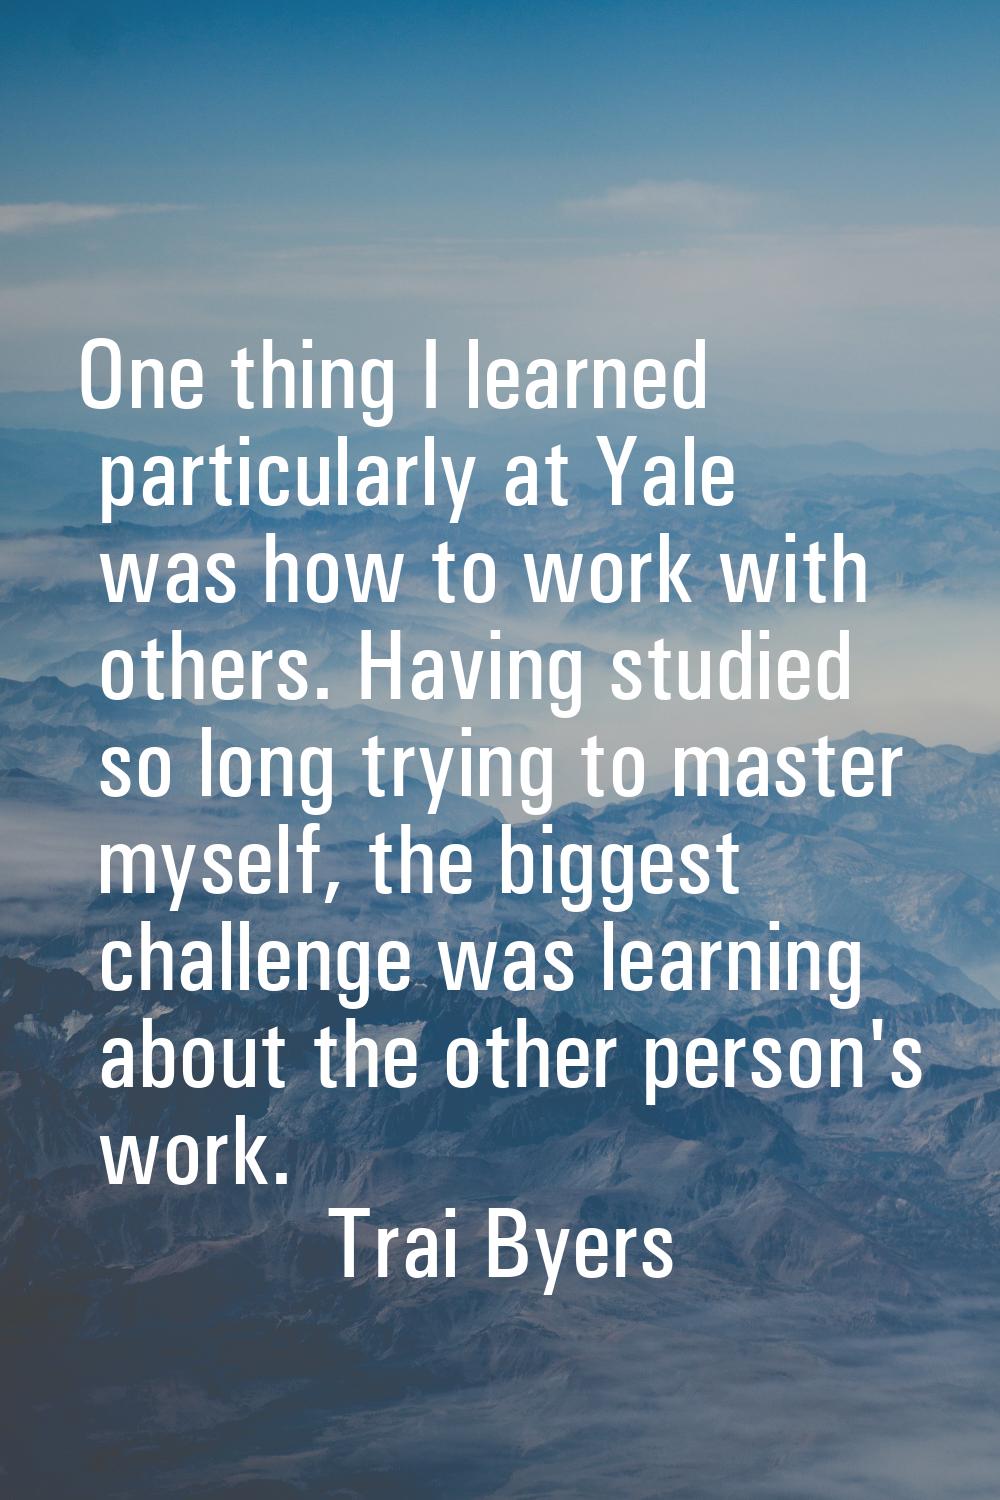 One thing I learned particularly at Yale was how to work with others. Having studied so long trying